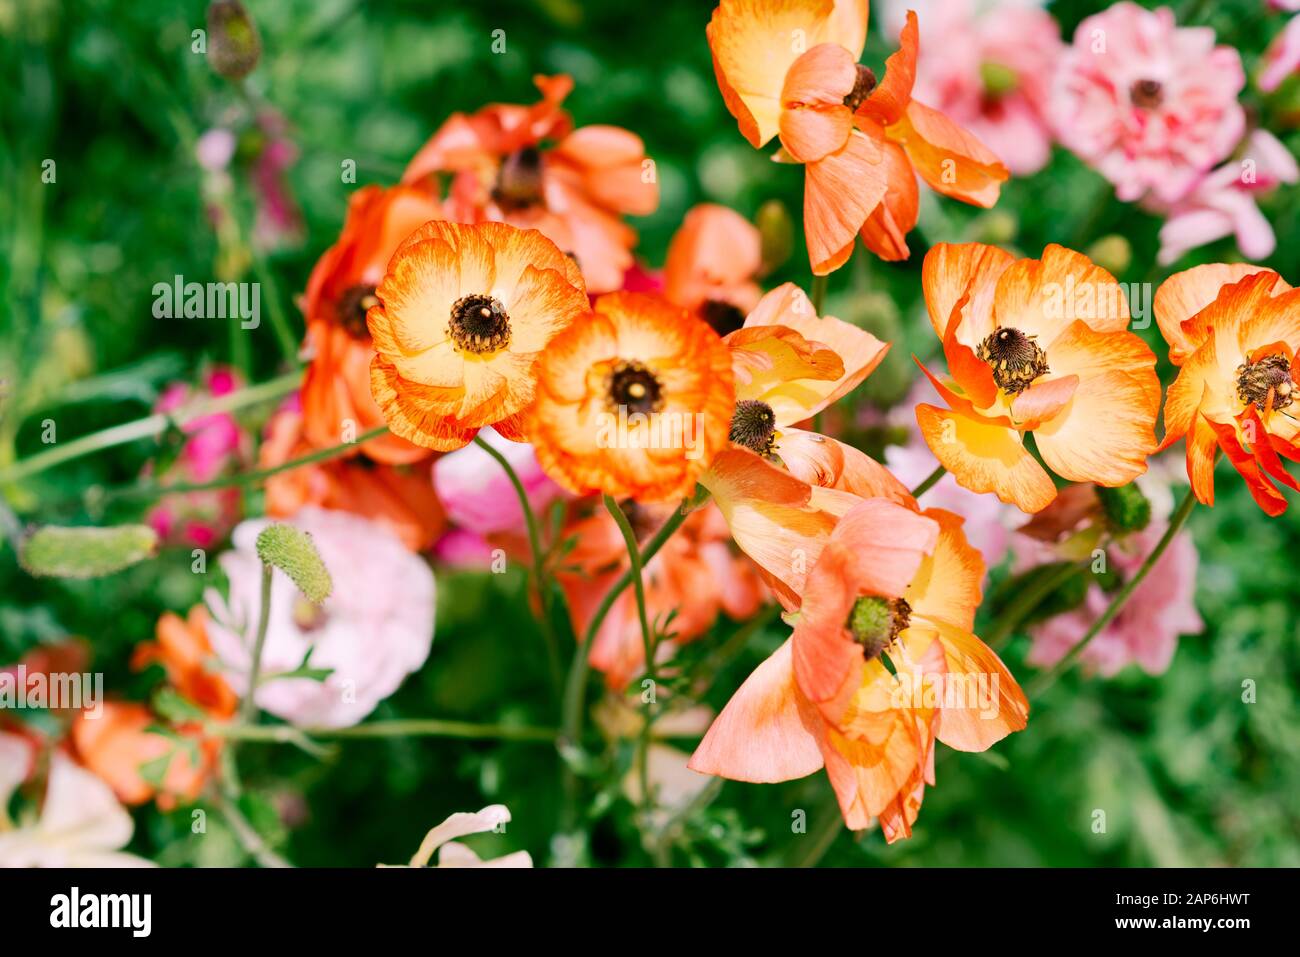 Beautiful garden flowers at sunny day. Group of amazing orange color flowers in a garden. Stock Photo